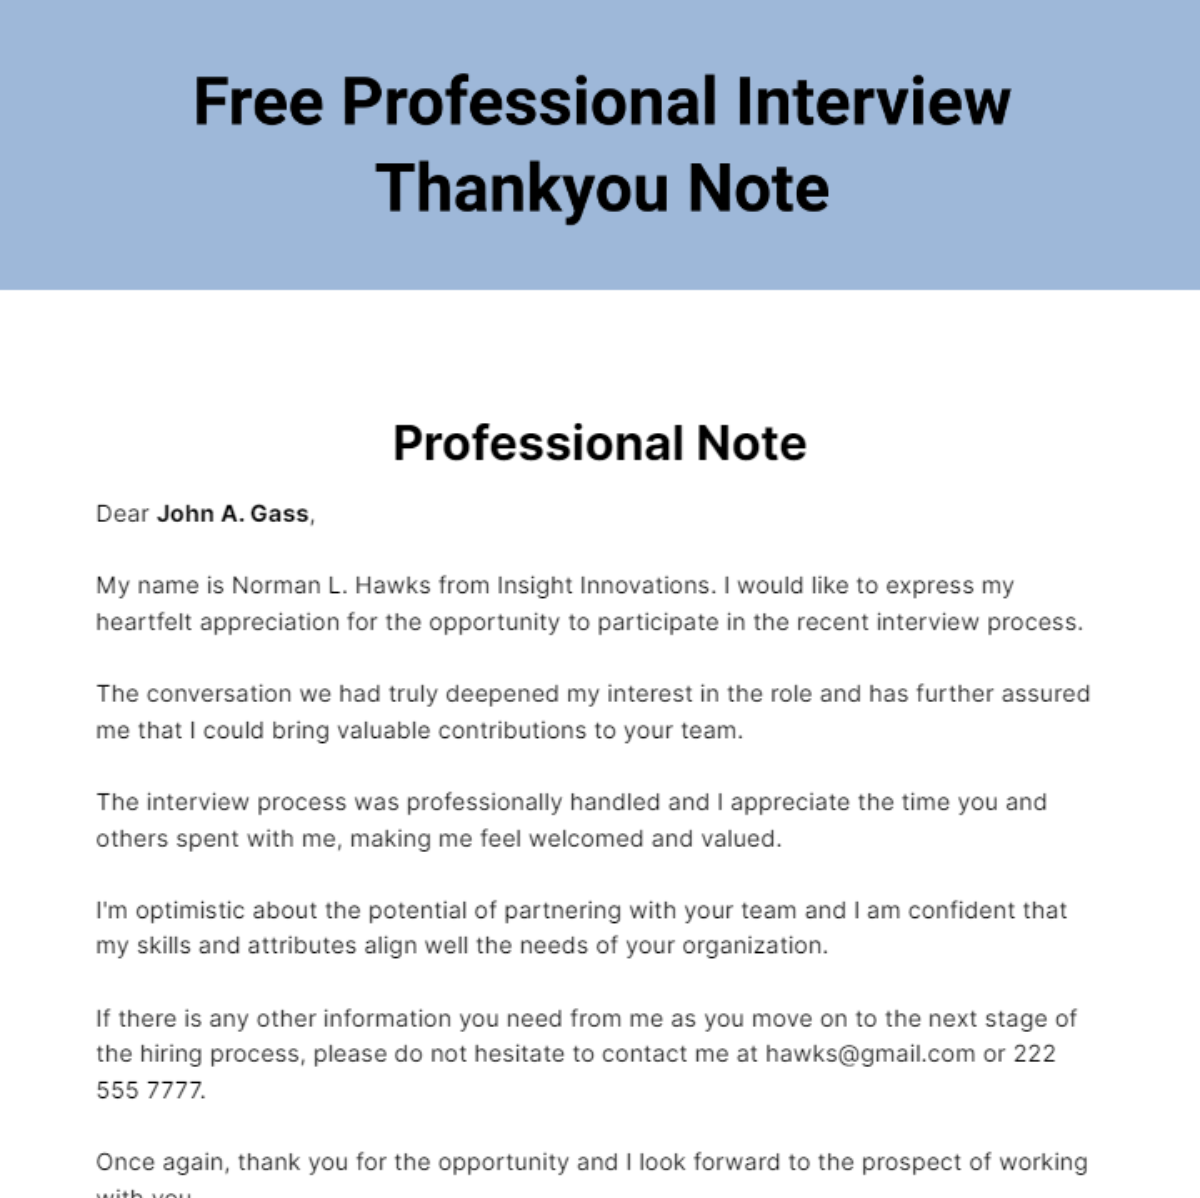 Free Professional Interview Thankyou Note Template